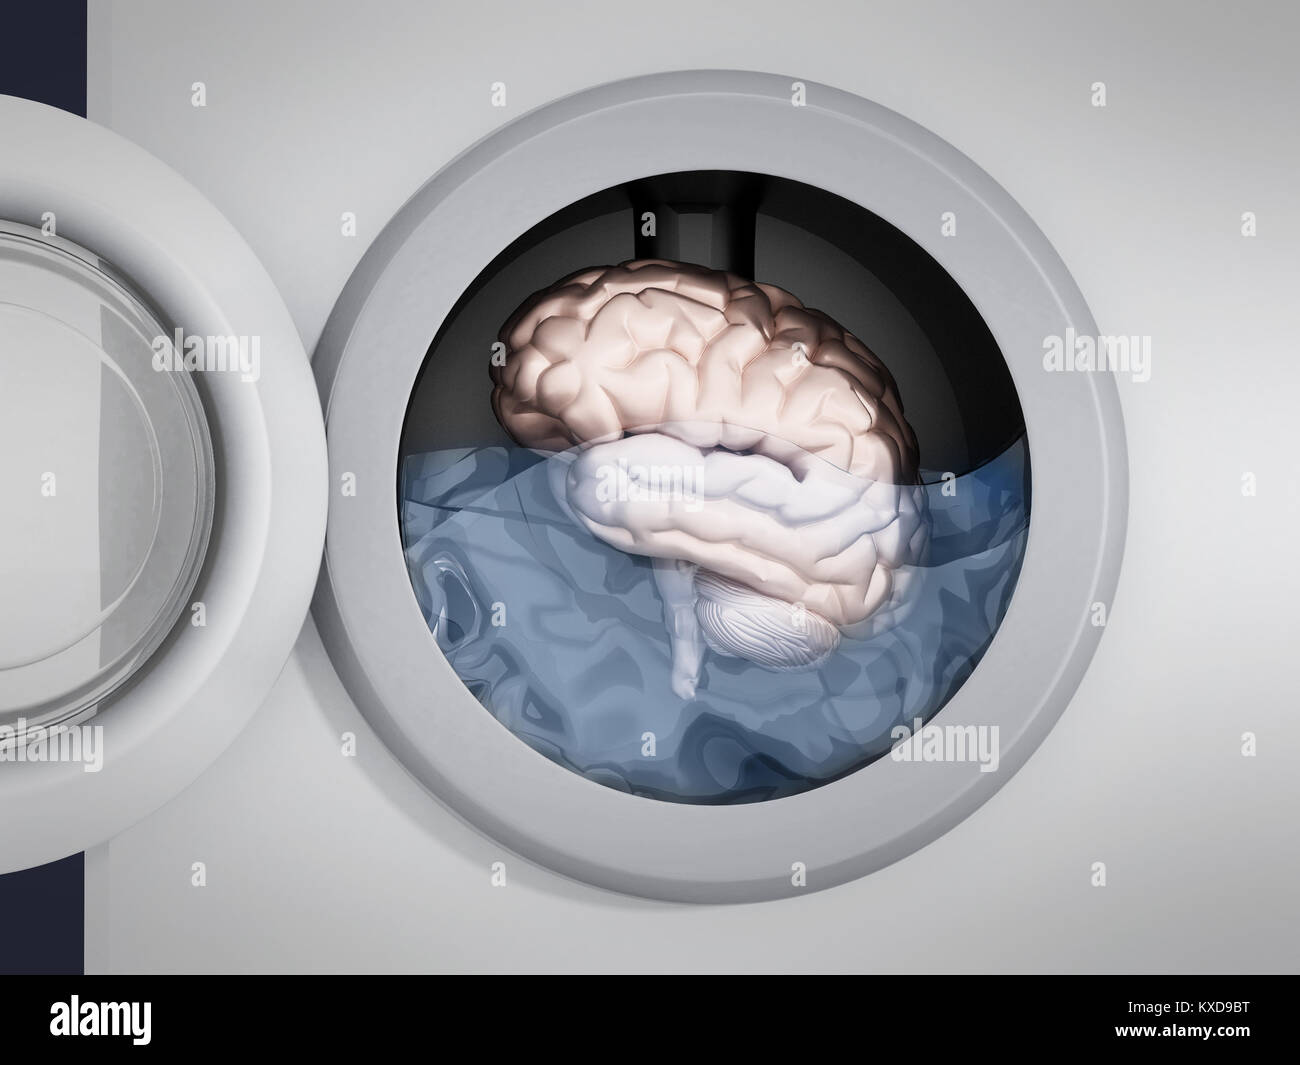 Brain being washed in washing machine. 3D illustration. Stock Photo